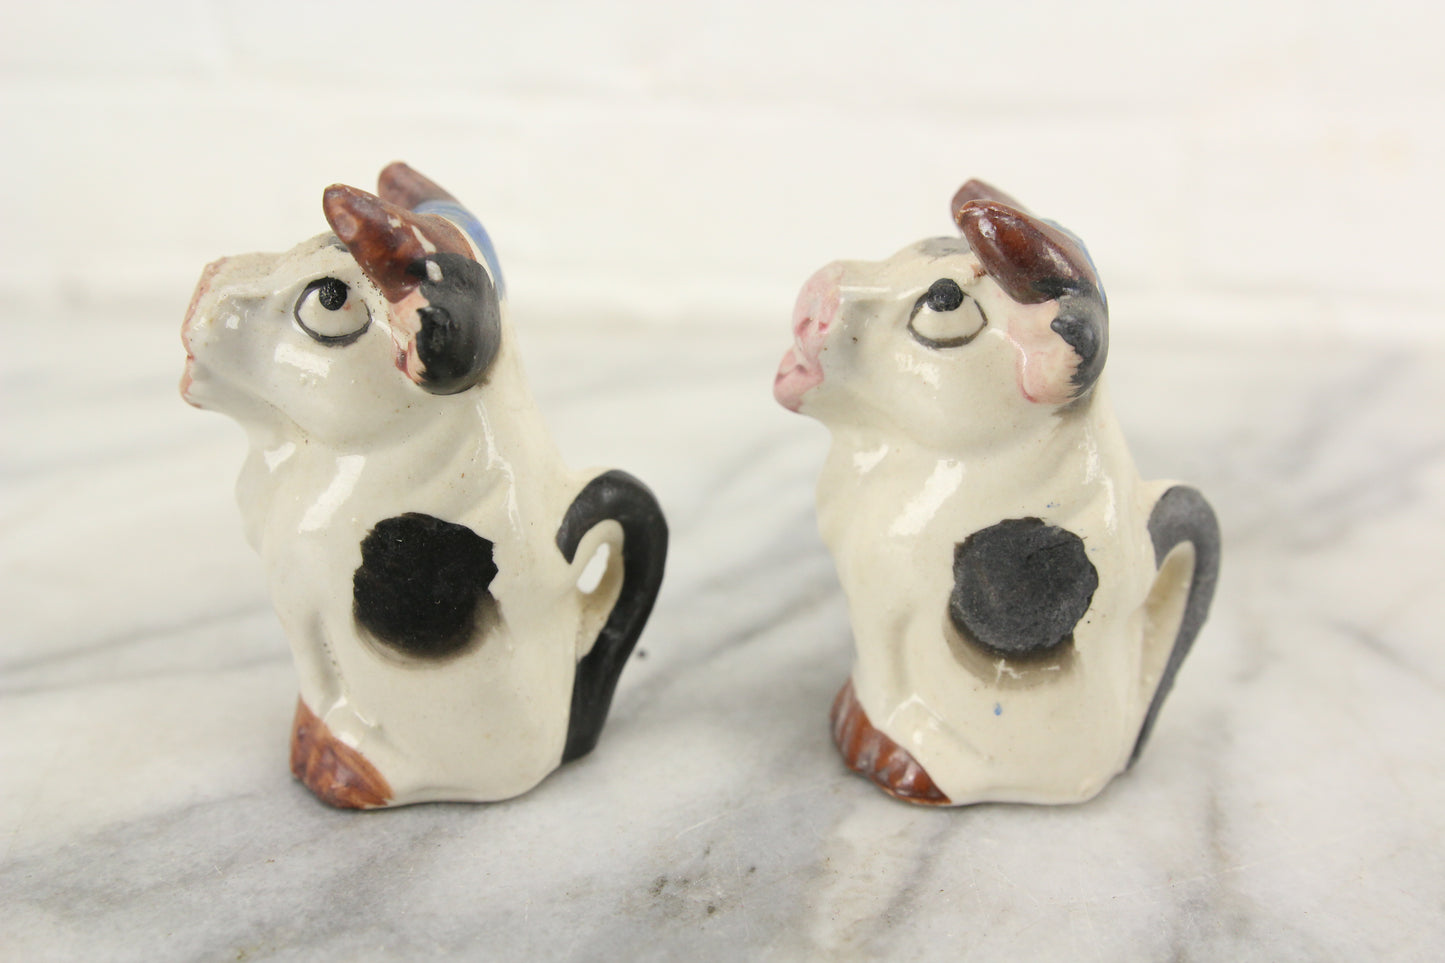 Bull Cow Porcelain Salt and Pepper Shakers, Made in Japan